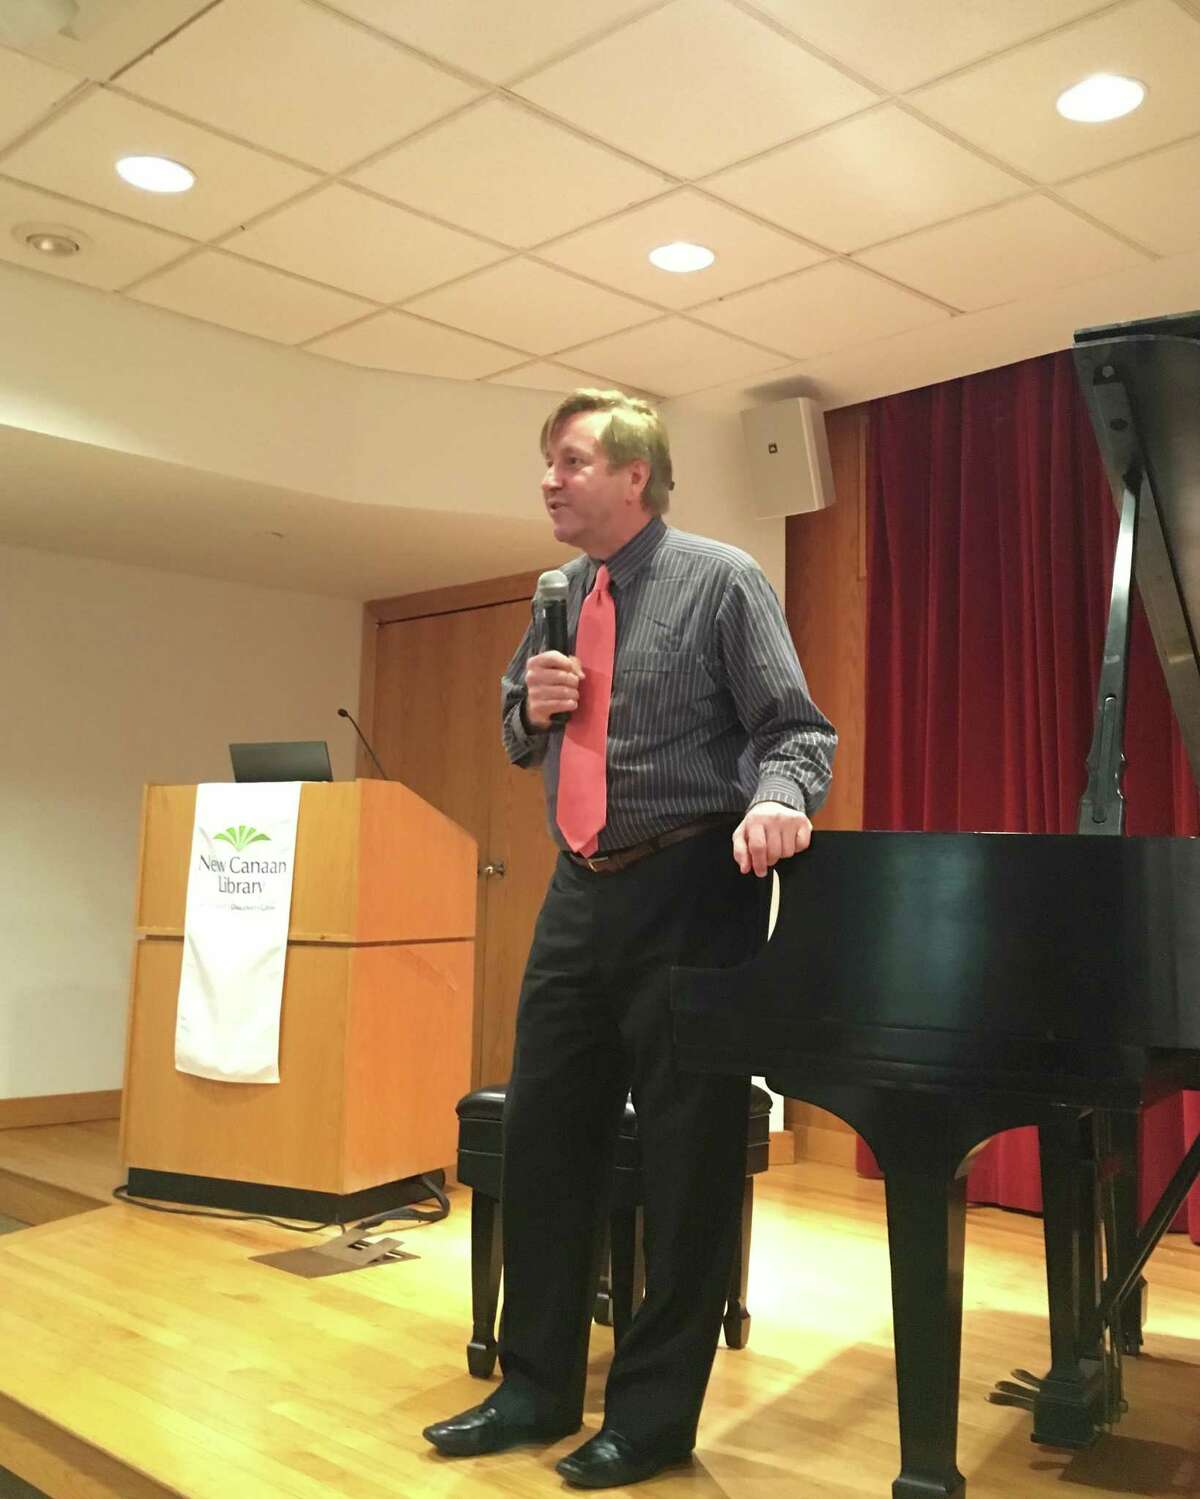 Concert pianist Paul Bisaccia played a night of American piano classics on March 3 at the New Canaan Library.